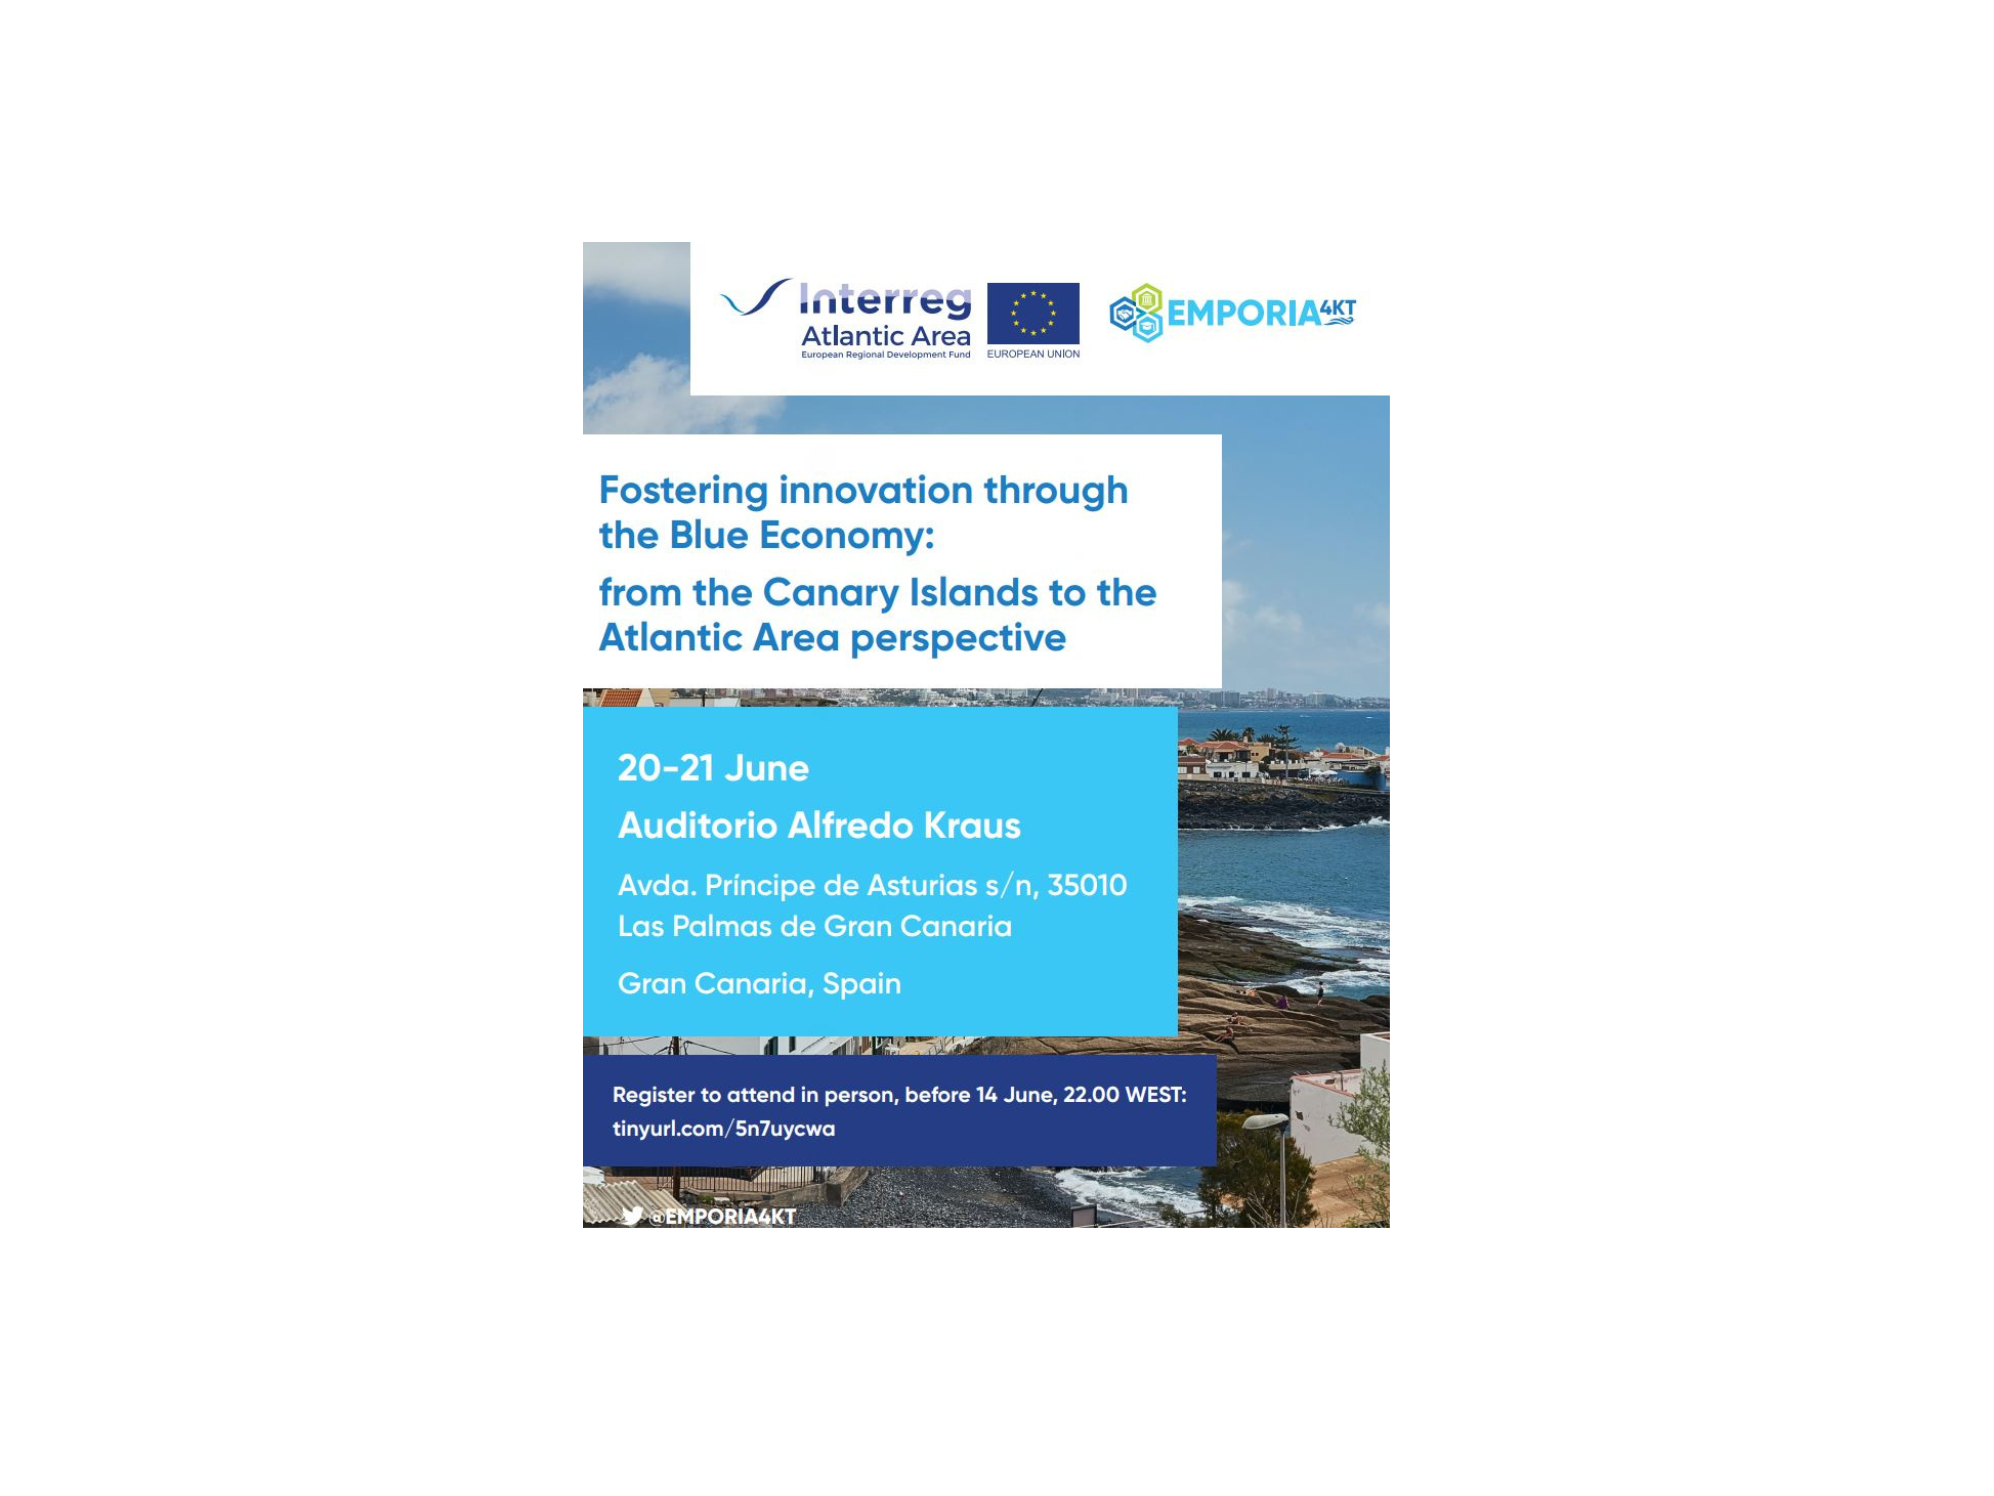 EMPORIA4KT: Fostering innovation through the blue economy: from the Canary Islands to the Atlantic Area perspective